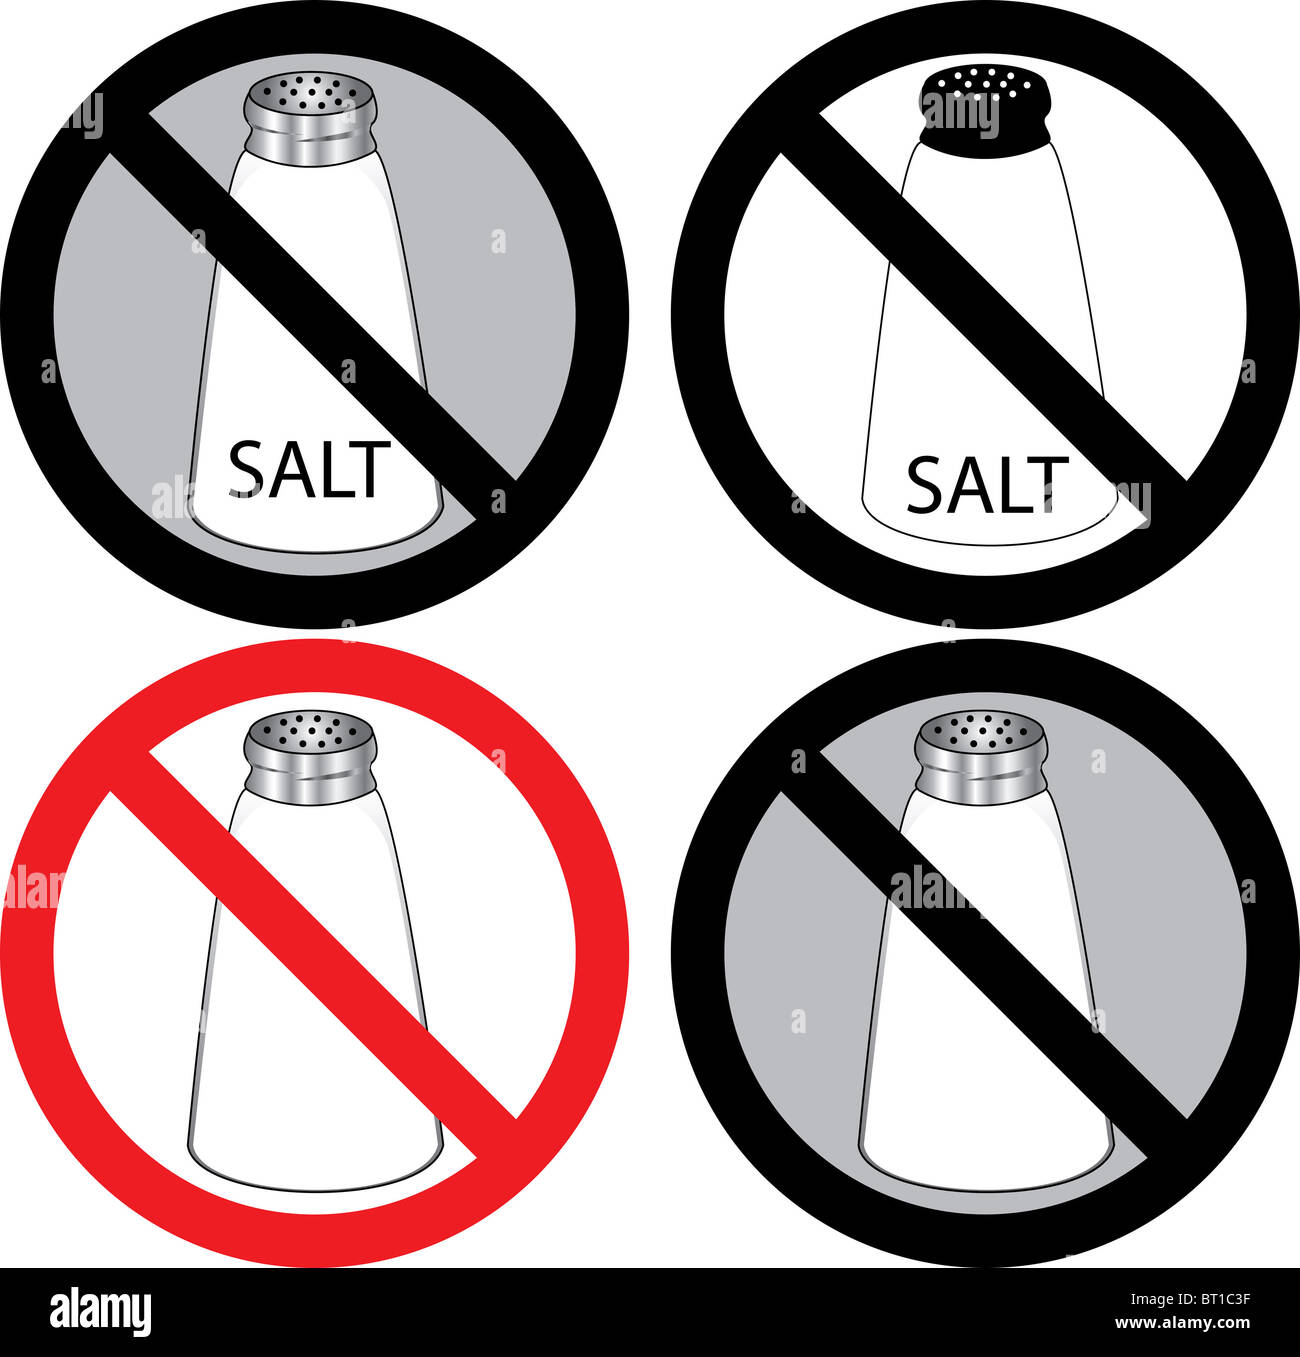 Vector Illustration of four no salt signs. Stock Photo